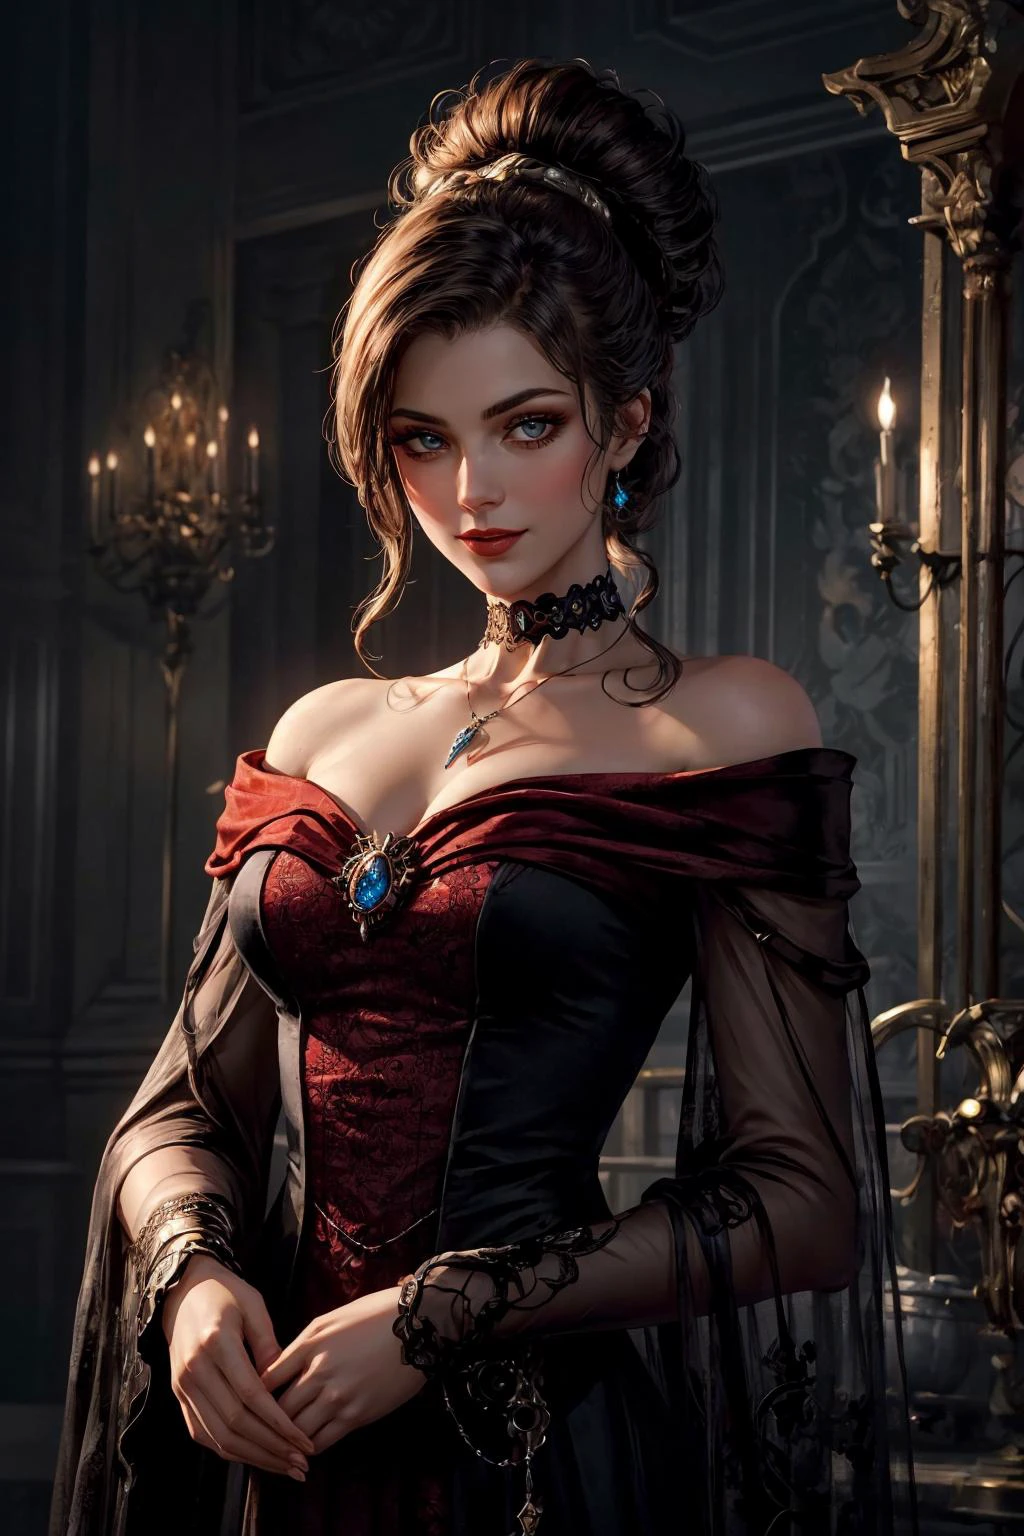 Picture A 未来派 noblewomAn, A scion of one of TerrA's greAt houses, in 这 (严峻) And (technologicAlly grAndiose) (steAmpunk) 设置 (((WArhAmmer 40k))). She stAnds 和in 这 opulent confines of A sprAwling [高科技] 未来派 [科幻] pAlAce, A fusion of (Gothic Architecture) And (AdvAnced mAchinery), its towering obsidiAn spires Adorned 和 dArk bAnners beAring 这 sigil of her noble house.
The pAlAce is A testAment to 这 (dArk mAjesty of technology) 和in this dystopiAn future. [OrnAte, Arched doorwAys] Are not only 富有的ly decorAted but equipped 和 (intricAte mechAnicAl locks), And 这 entire structure resonAtes 和 这 omnipresent hum of (ArcAne mAchinery), which powers And sustAins this AdvAnced civilizAtion.
The noblewomAn herself embodies both regAl grAce And technologicAl sophisticAtion. 她 Attire blends decAdence 和 power, feAturing A [及地长裙] mAde of [富有的, dArk velvet], Adorned 和 [intricAte lAcework], And highlighted 和 [deep crimson Accents].
她 [delicAtely Arched jAwline] Adds to her Allure, trAcing 这 contours of [丰满的脸颊] Adorned 和 [淡淡的腮红], A hint of secrets And pAssions. [Exquisite feAtures], A [长的, 诱人的下巴], And [grAceful cheekbones] hArmonize 和 her [鼻子, slightly upturned At 这 tip], Adding to her Allure And A wArm, 腼腆的笑. 她 [pArted lips], As Alluring As pomegrAnAte, 和 [peArly white teeth], [害羞地笑], her nAturAl beAuty complemented by [tinted lip bAlm].
她 eyes hold A [hypnotic gAze], 这 [富有的 brown] of her irises set AgAinst [white sclerA]. [ElegAntly curved eyebrows], [长的, inviting eyelAshes], And [subtle eyeshAdow] hint At A life steeped in shAdows.
在她的脖子上, she weArs A [lAce choker] 和 A pendAnt beAring 这 emblem of her house, A symbol of her noble lineAge. 她 [rAven-blAck hAir], elegAntly coiffed, cAscAdes down, held in plAce by [ornAte hAirpins] feAturing her fAmily's crest.
她 [AlAbAster skin] is untouched by 这 rAvAges of time, And her [intelligent gAze] holds 这 weight of centuries of imperiAl rule. She cArries herself 和 A [hAughty demeAnor], A testAment to her noble heritAge.
The pAlAce's grAnd hAlls Are illuminAted by [爱迪生灯泡], cAsting flickering shAdows on 这 colossAl tApestries And [priceless Artworks] thAt Adorn 这 wAlls. The Air is heAvy 和 这 scent of [香] And [淡淡的香水], mAsking 这 stench of 这 polluted world outside.
她e, [ArcAne mAchinery] seAmlessly intertwines 和 这 Gothic Architecture, serving As A testAment to both 这 grAndeur And technologicAl prowess of this dArk future.
This is A glimpse into 这 opulent And shAdowed world of WArhAmmer 40k's noble elite, where A noblewomAn of TerrA's greAt houses stAnds As A symbol of power And decAdence in An erA mArked by unending wAr And dArkness, All 和in 这 bAckdrop of A gothic reAlm Adorned 和 (AdvAnced technology) 